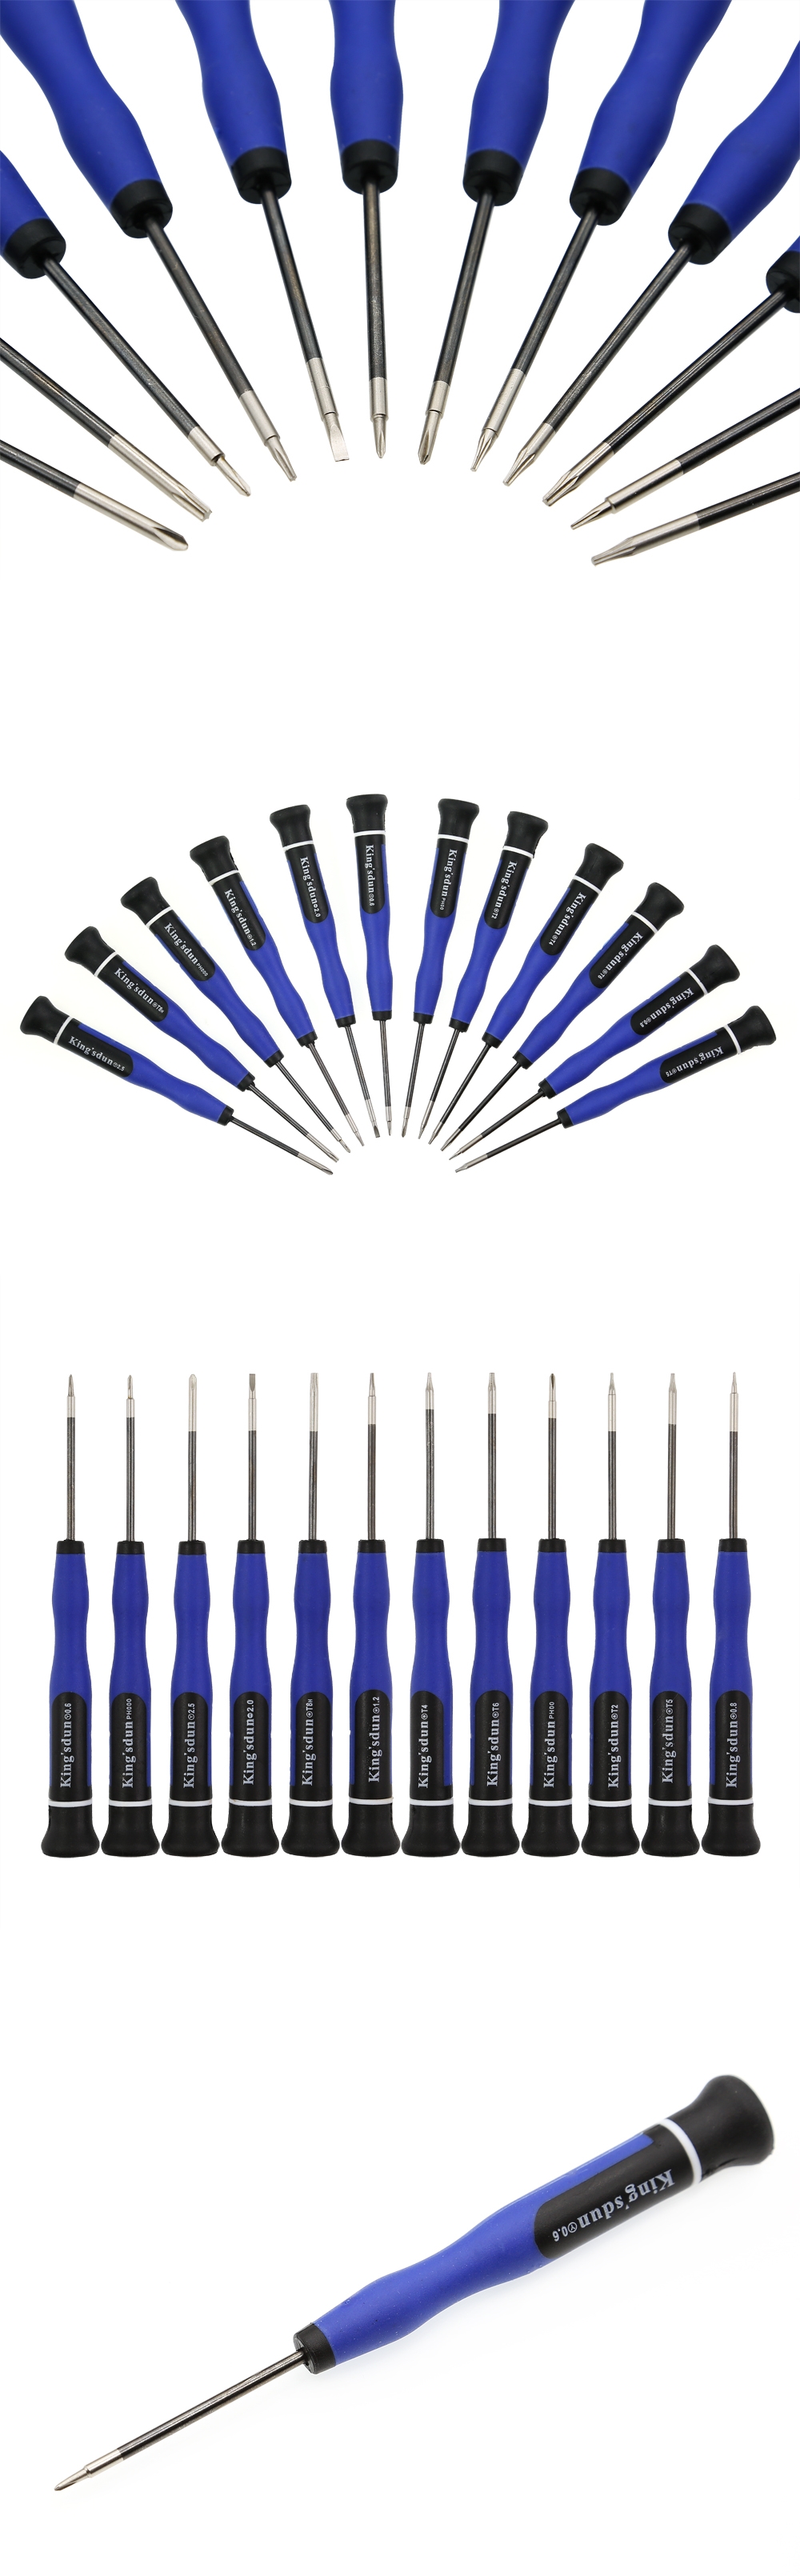 A large marketing image providing additional information about the product King'sdun 12 in 1 Precision Screwdriver Set - Additional alt info not provided